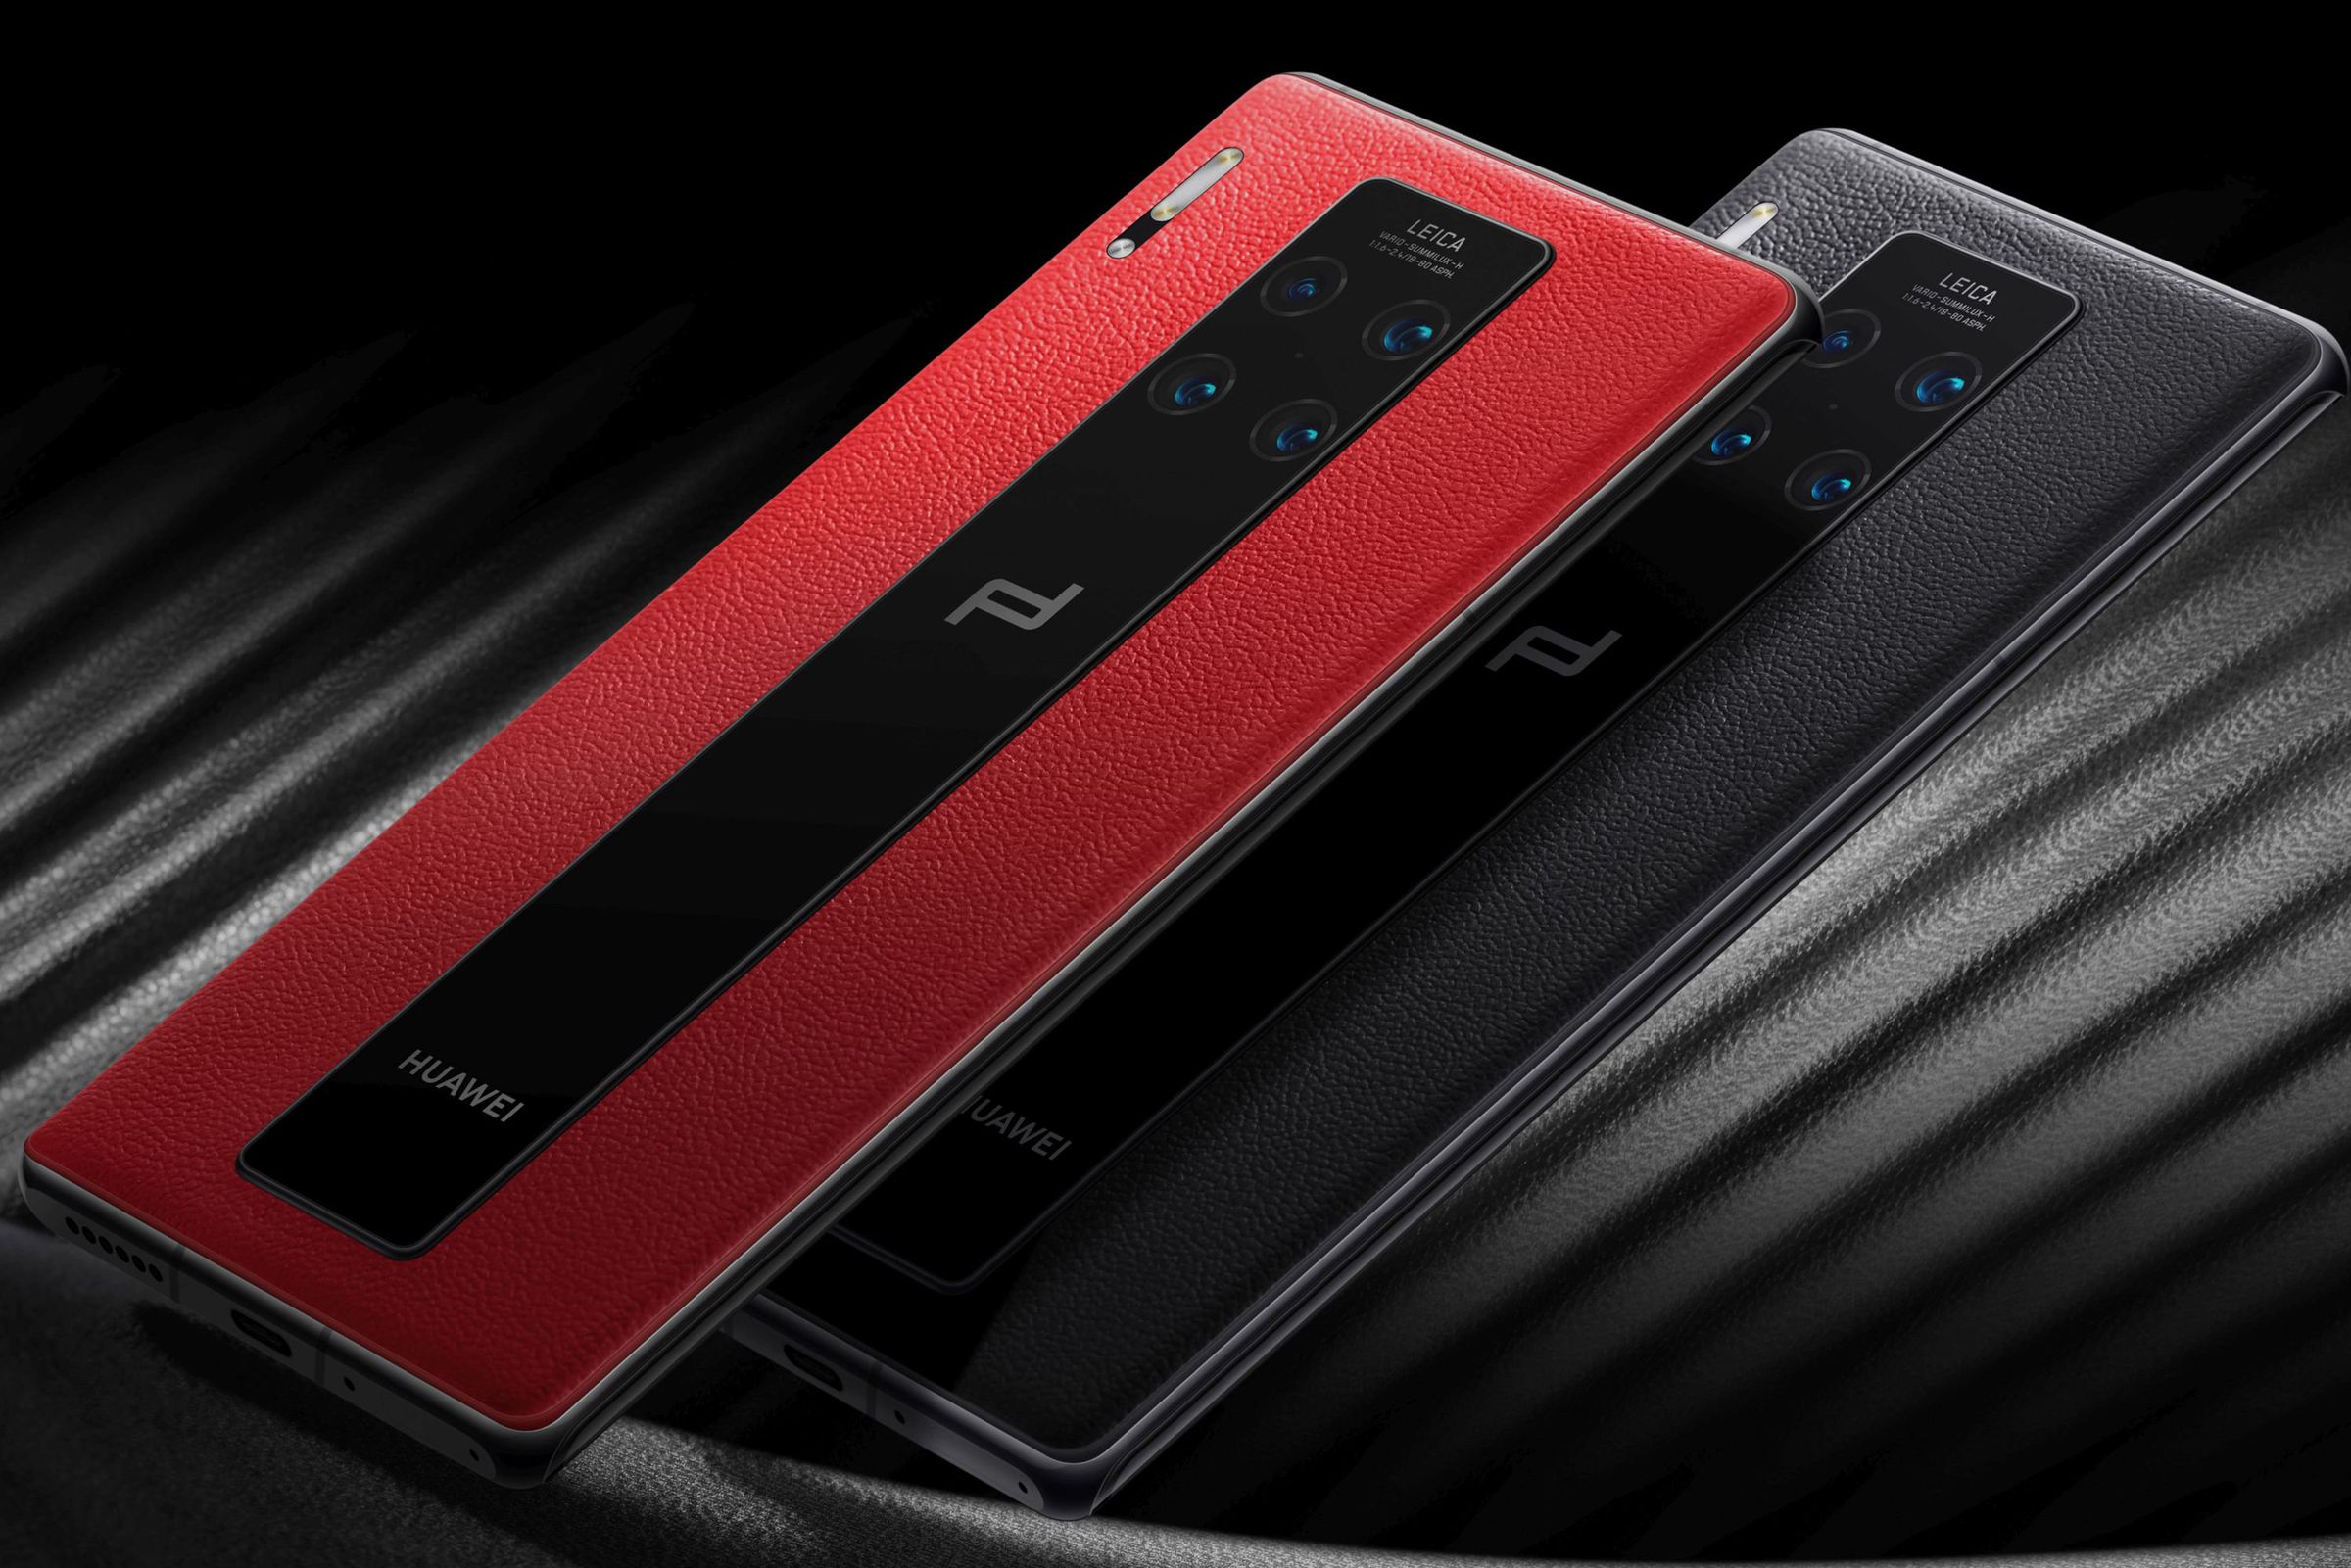 The rear of the phone has a combined leather and glass construction.﻿